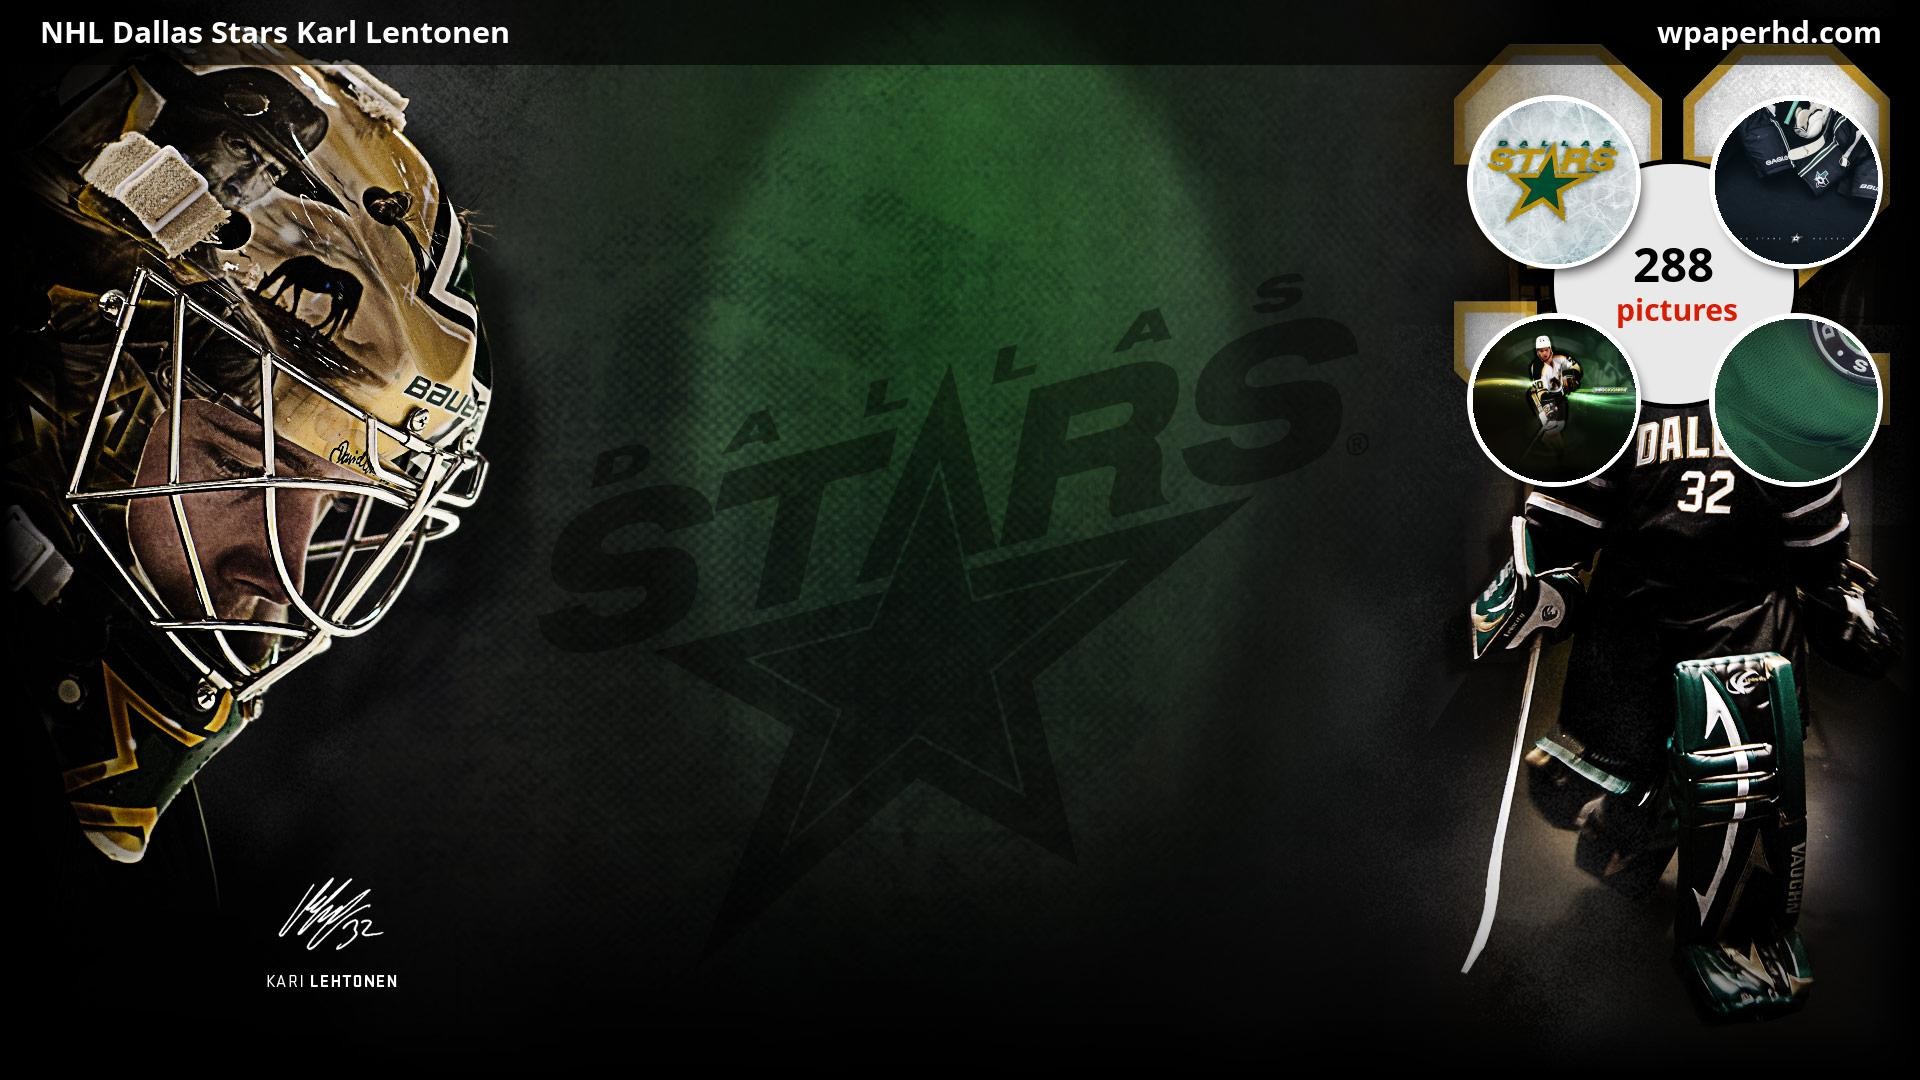 1920x1080 ... Dallas Stars Karl Lentonen wallpaper, where you can download this  picture in Original size and ...